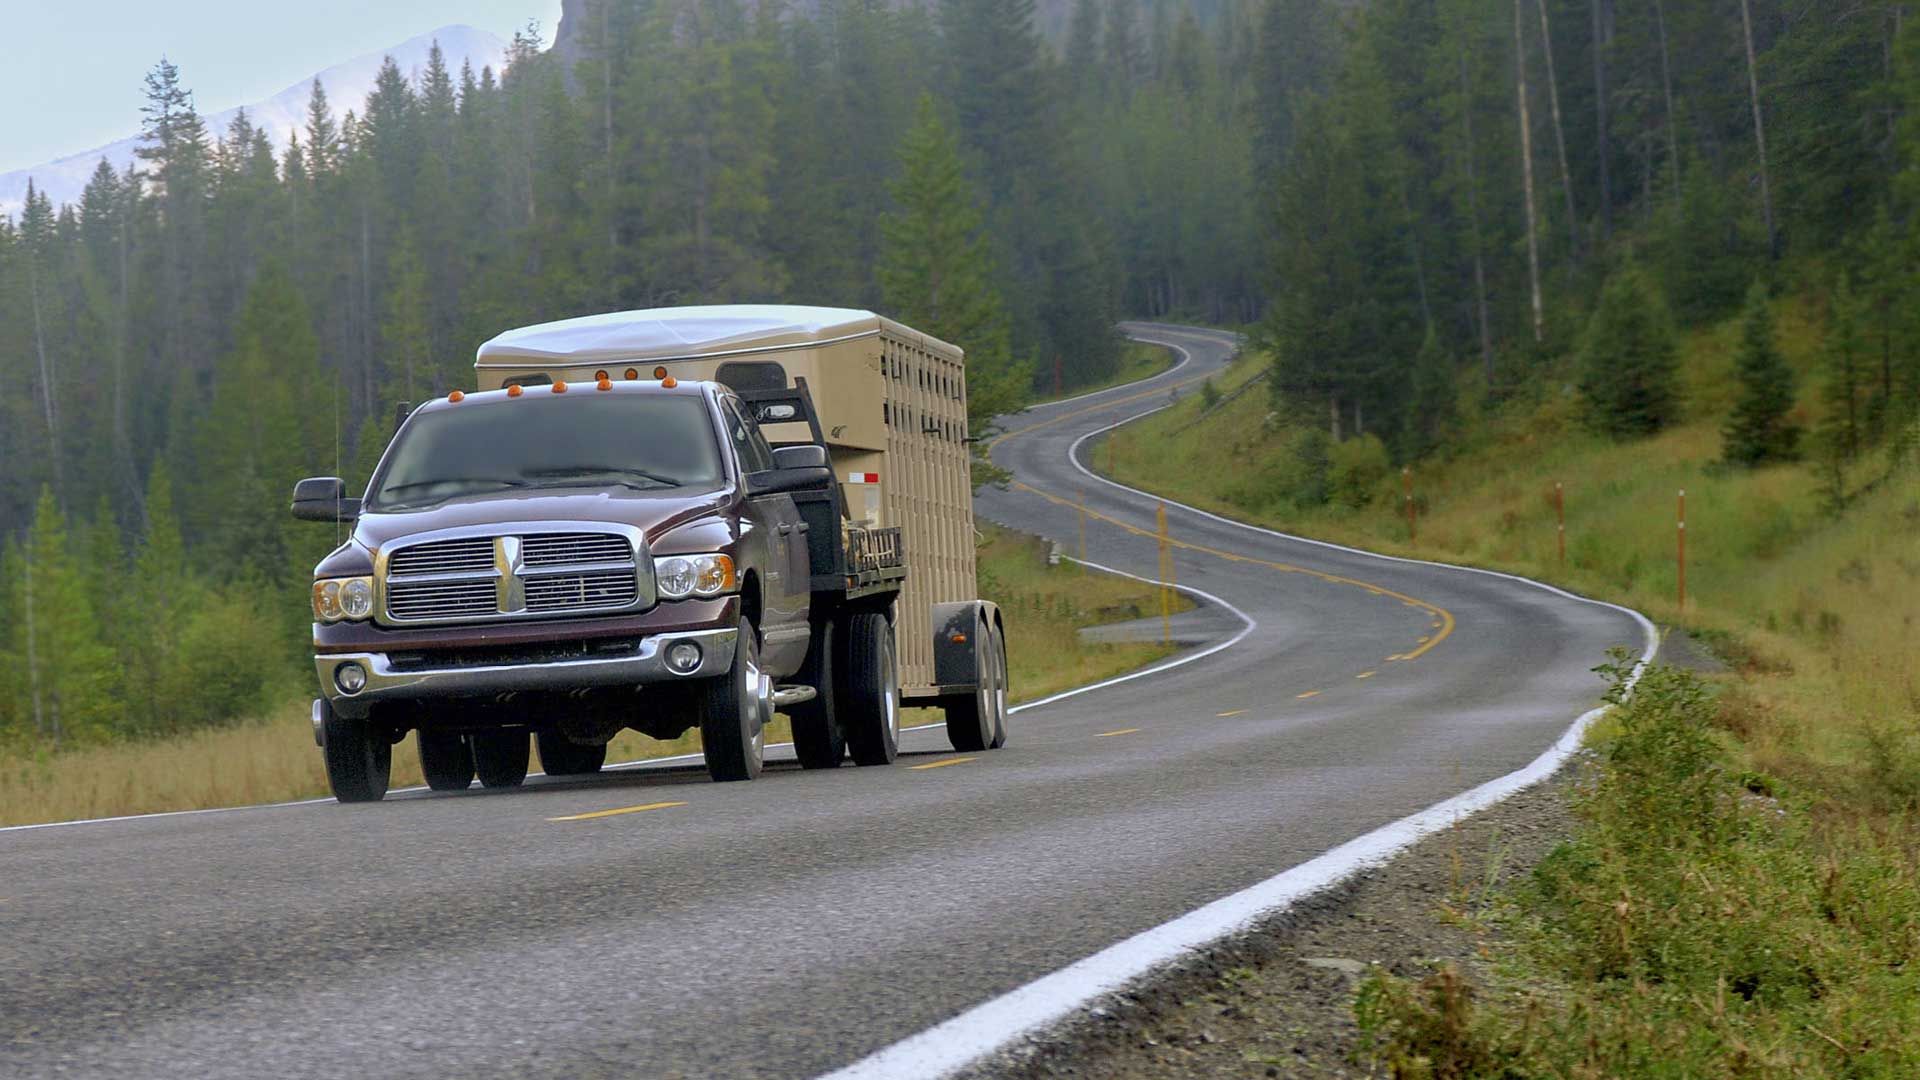 Pickup truck with a trailer on a winding road